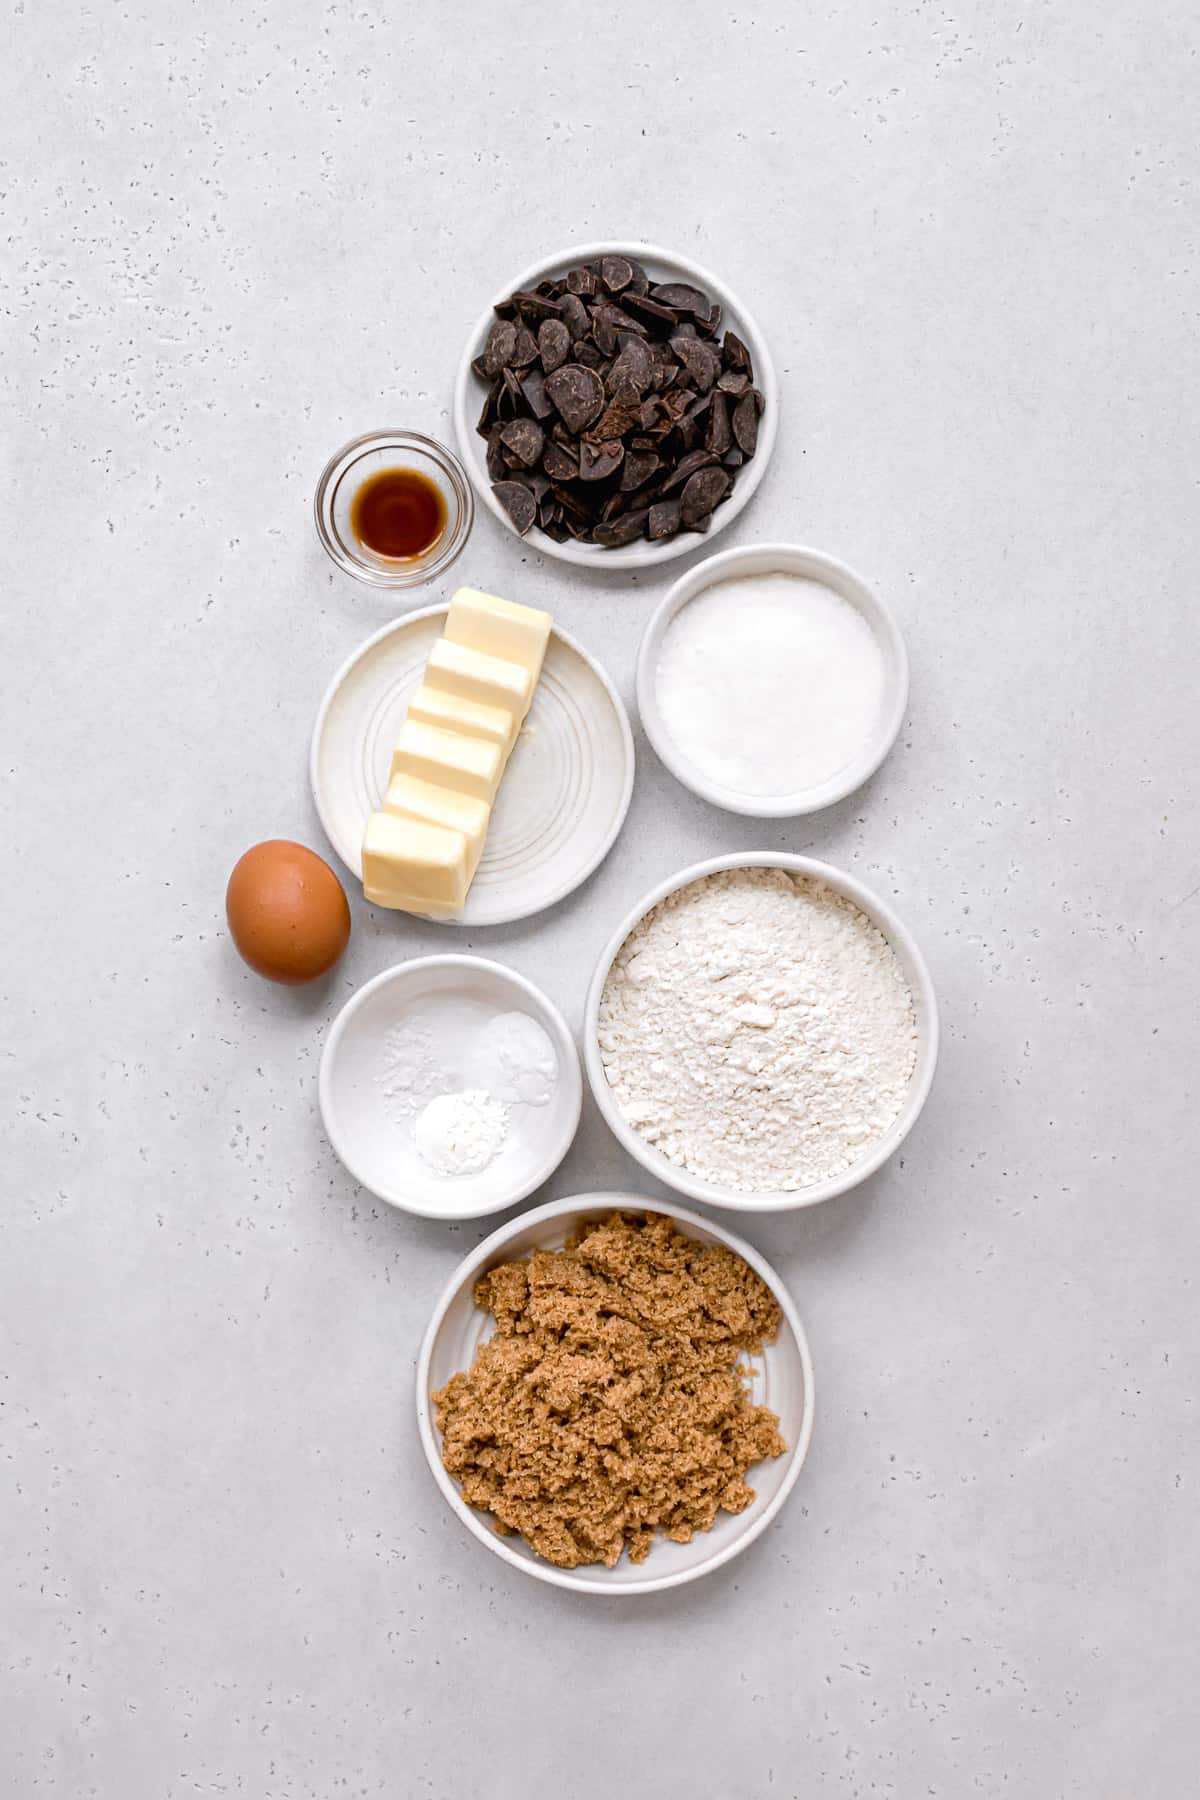 ingredients for gf chocolate chip cookies.